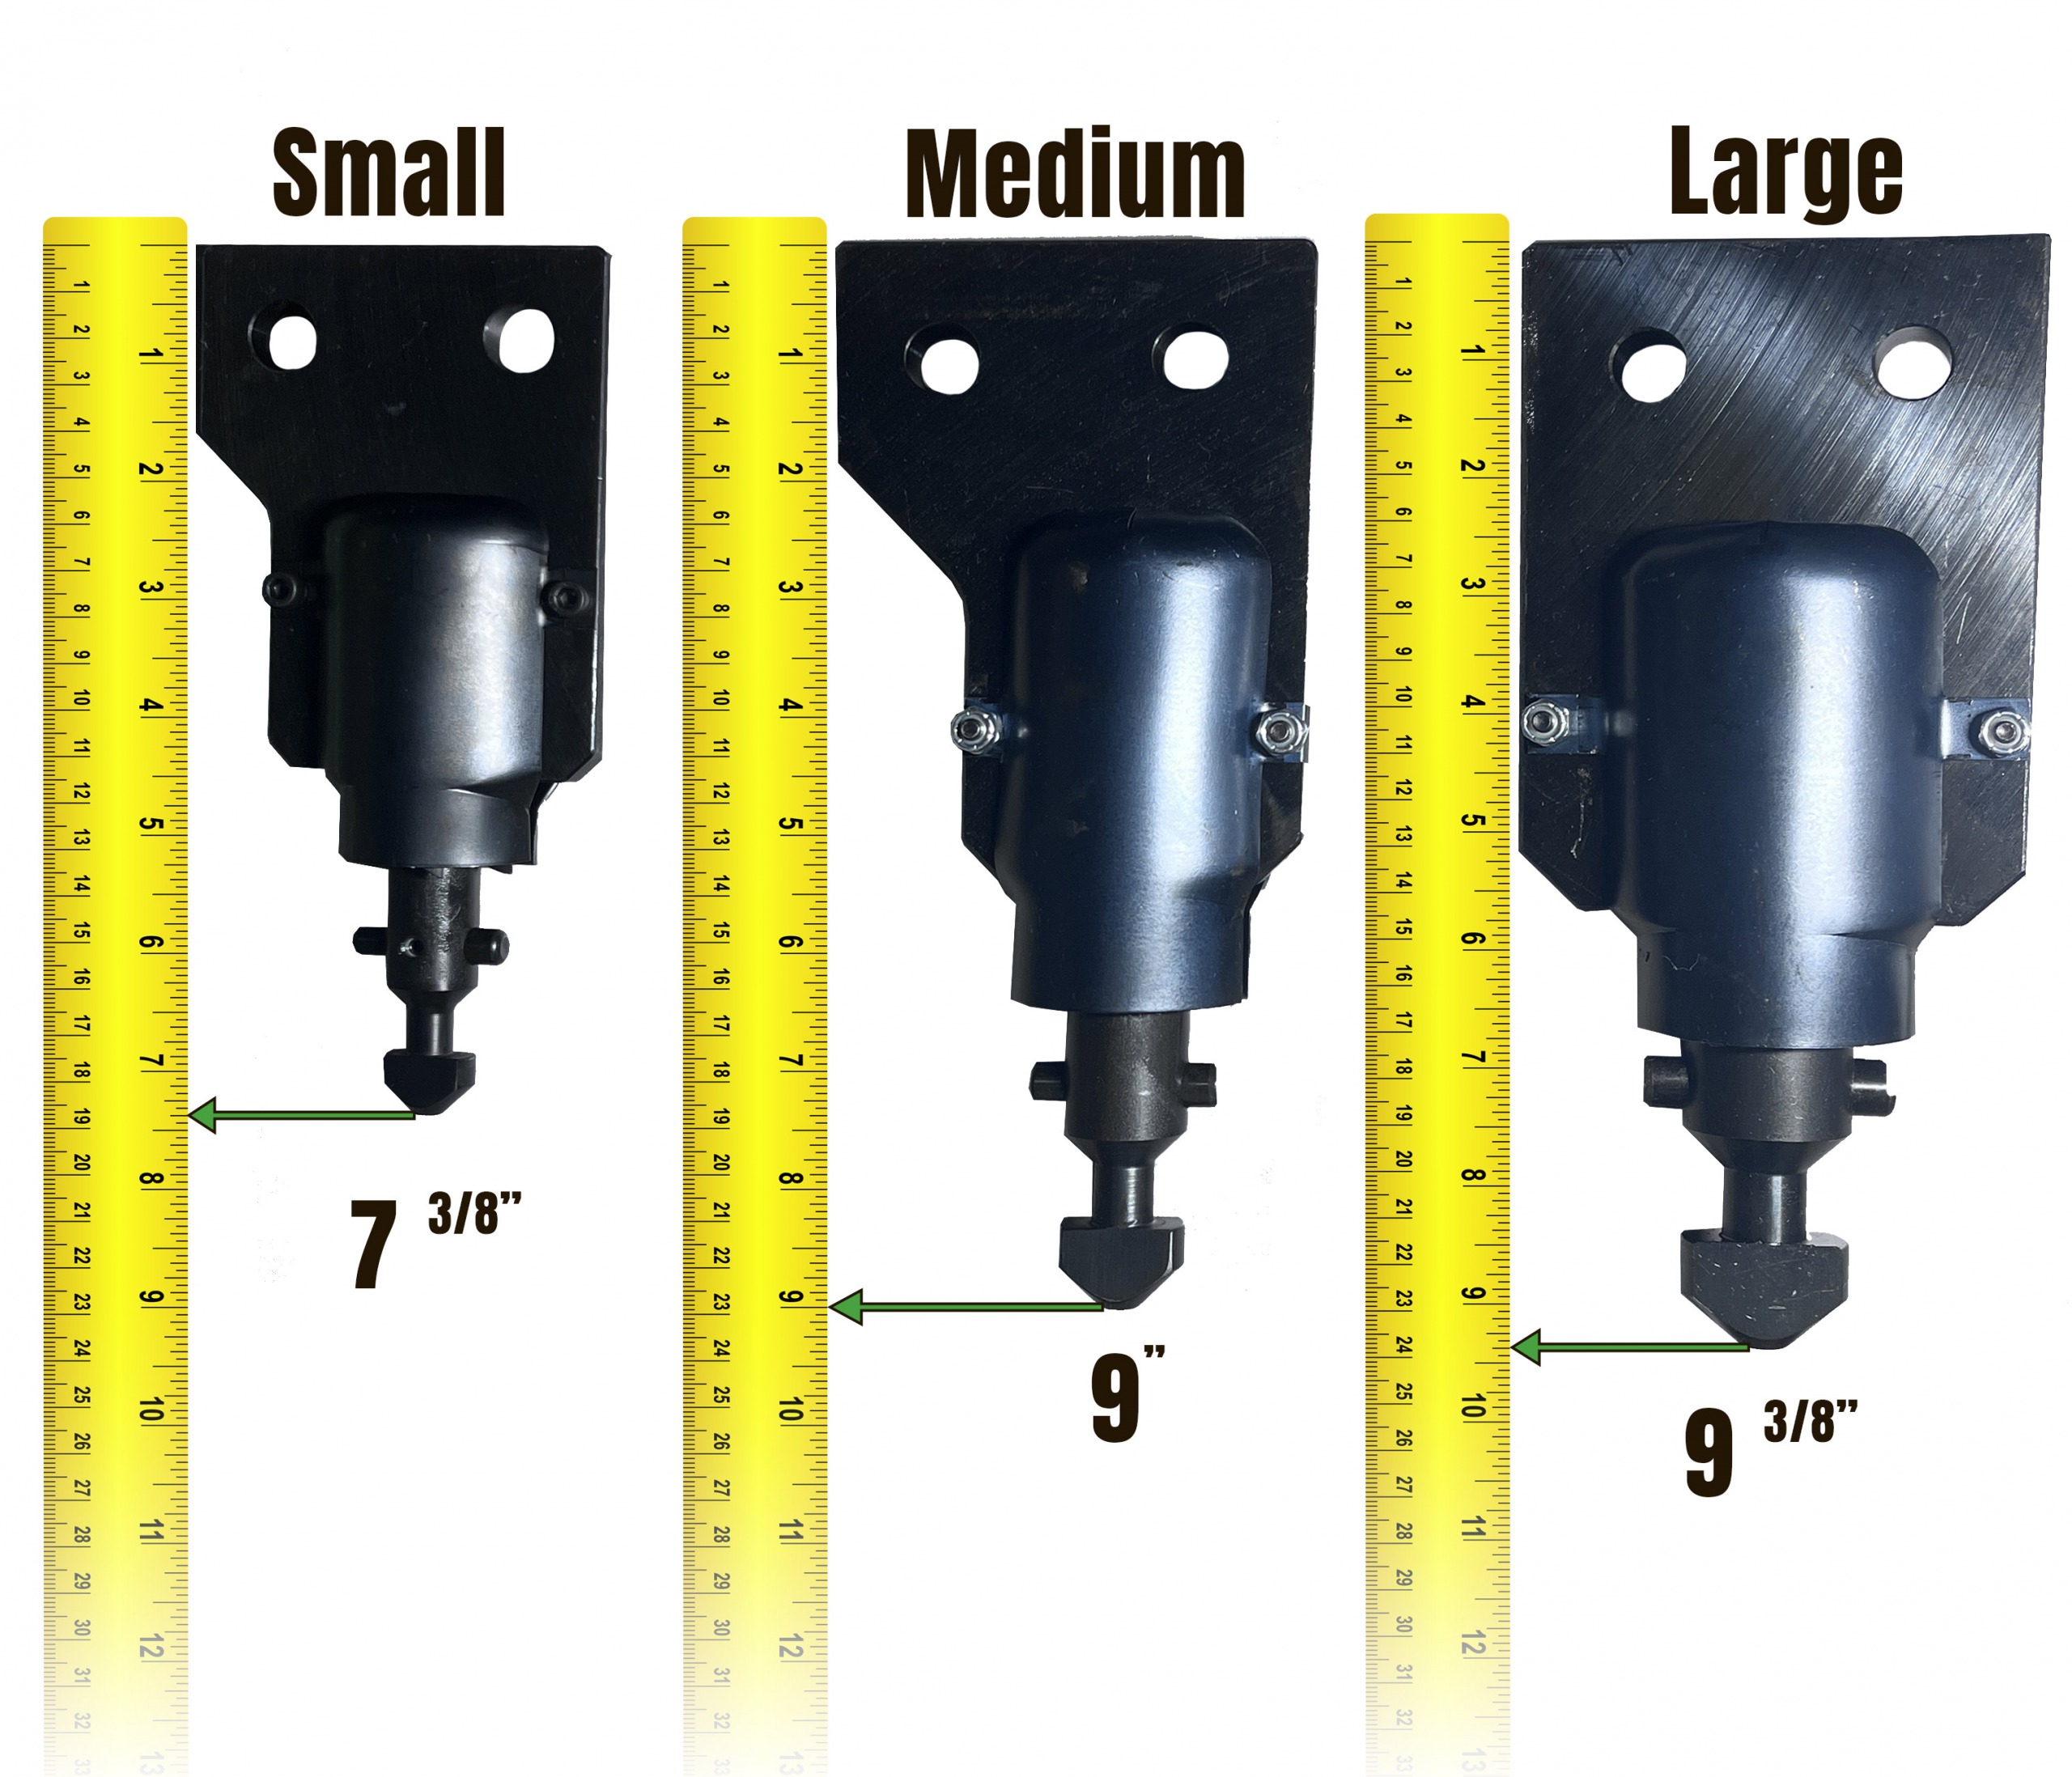 kenco actuator side by side size comparison with tape measure